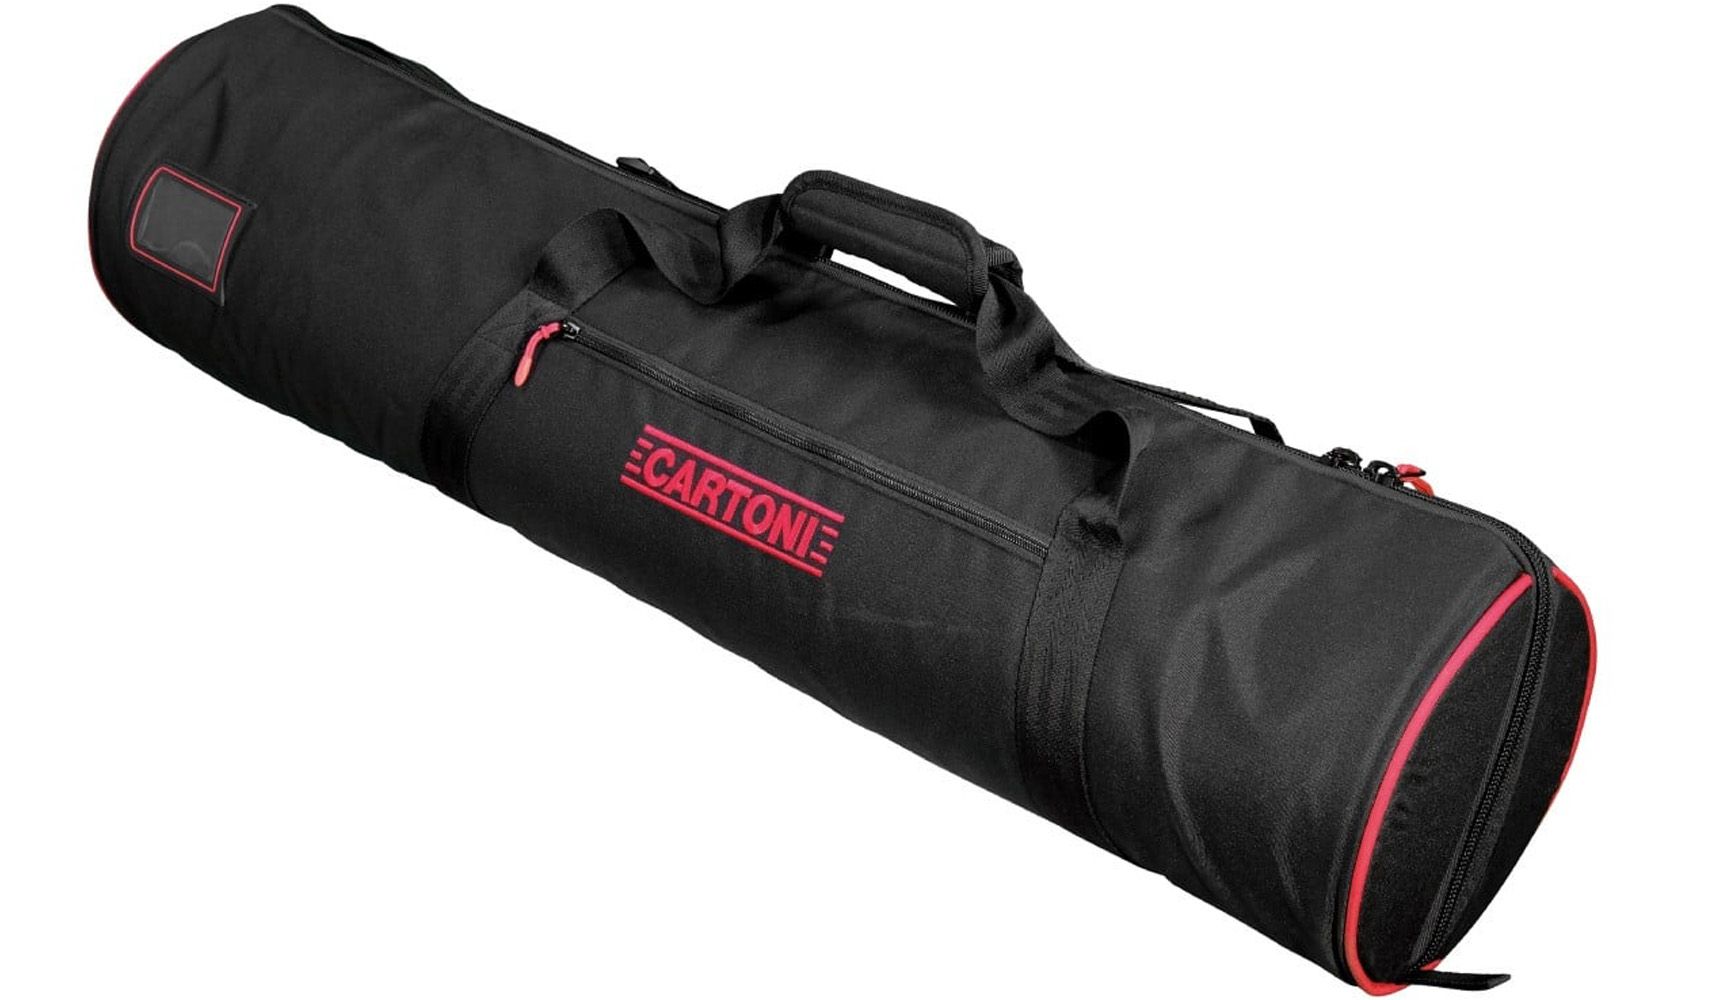 CARTONI - C107 - Soft bag for Red Lock systems